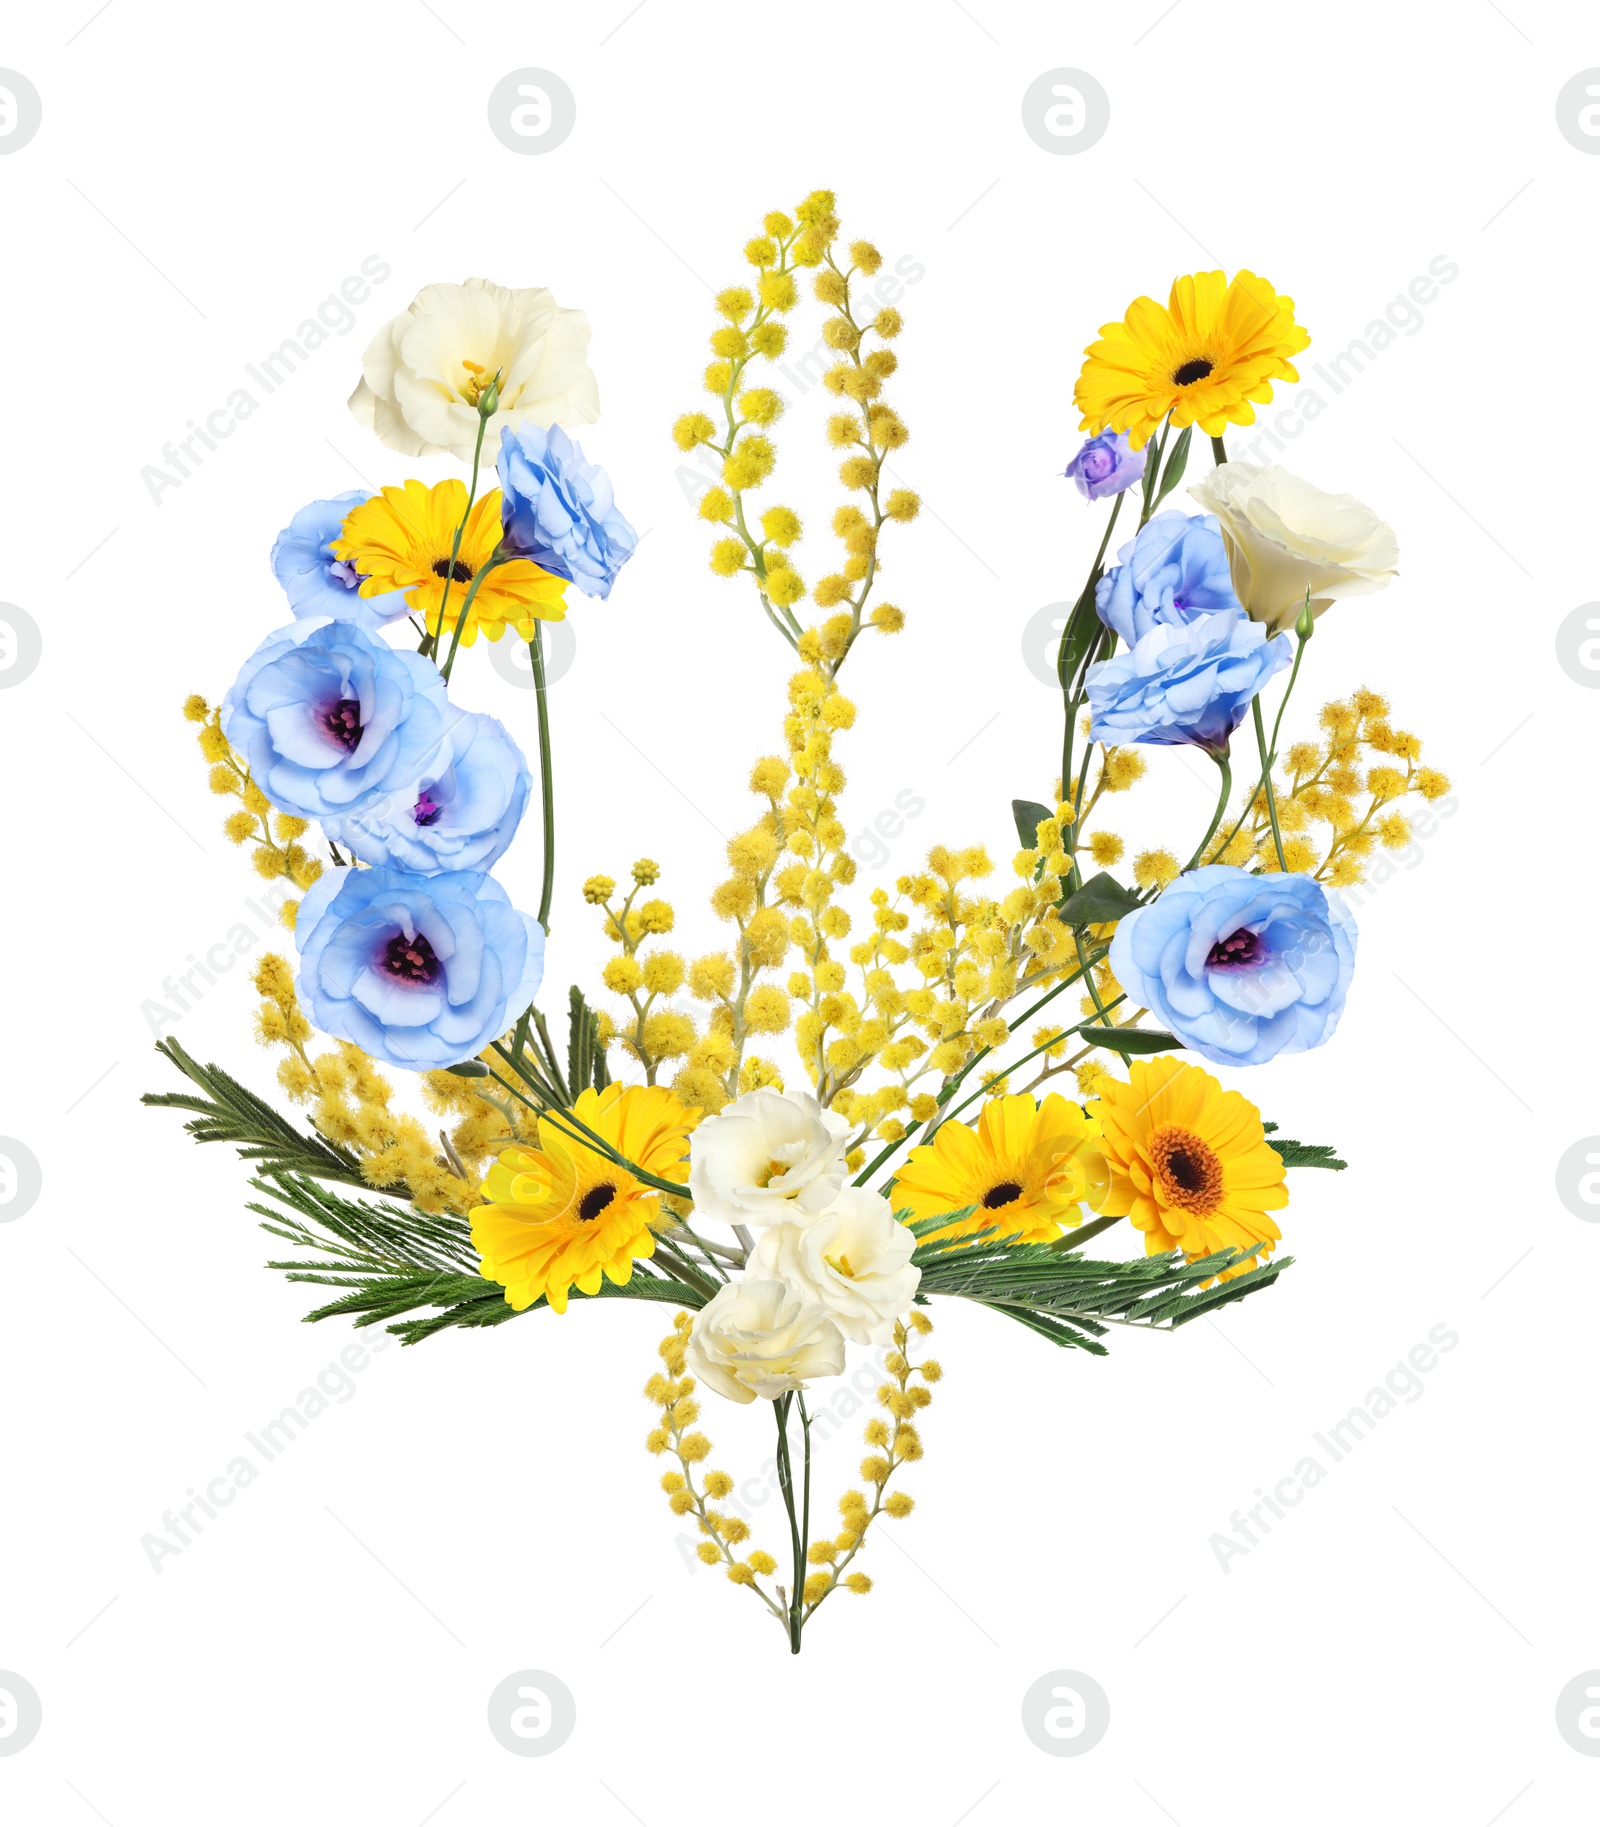 Image of Coat of arms of Ukraine made with beautiful flowers on white background